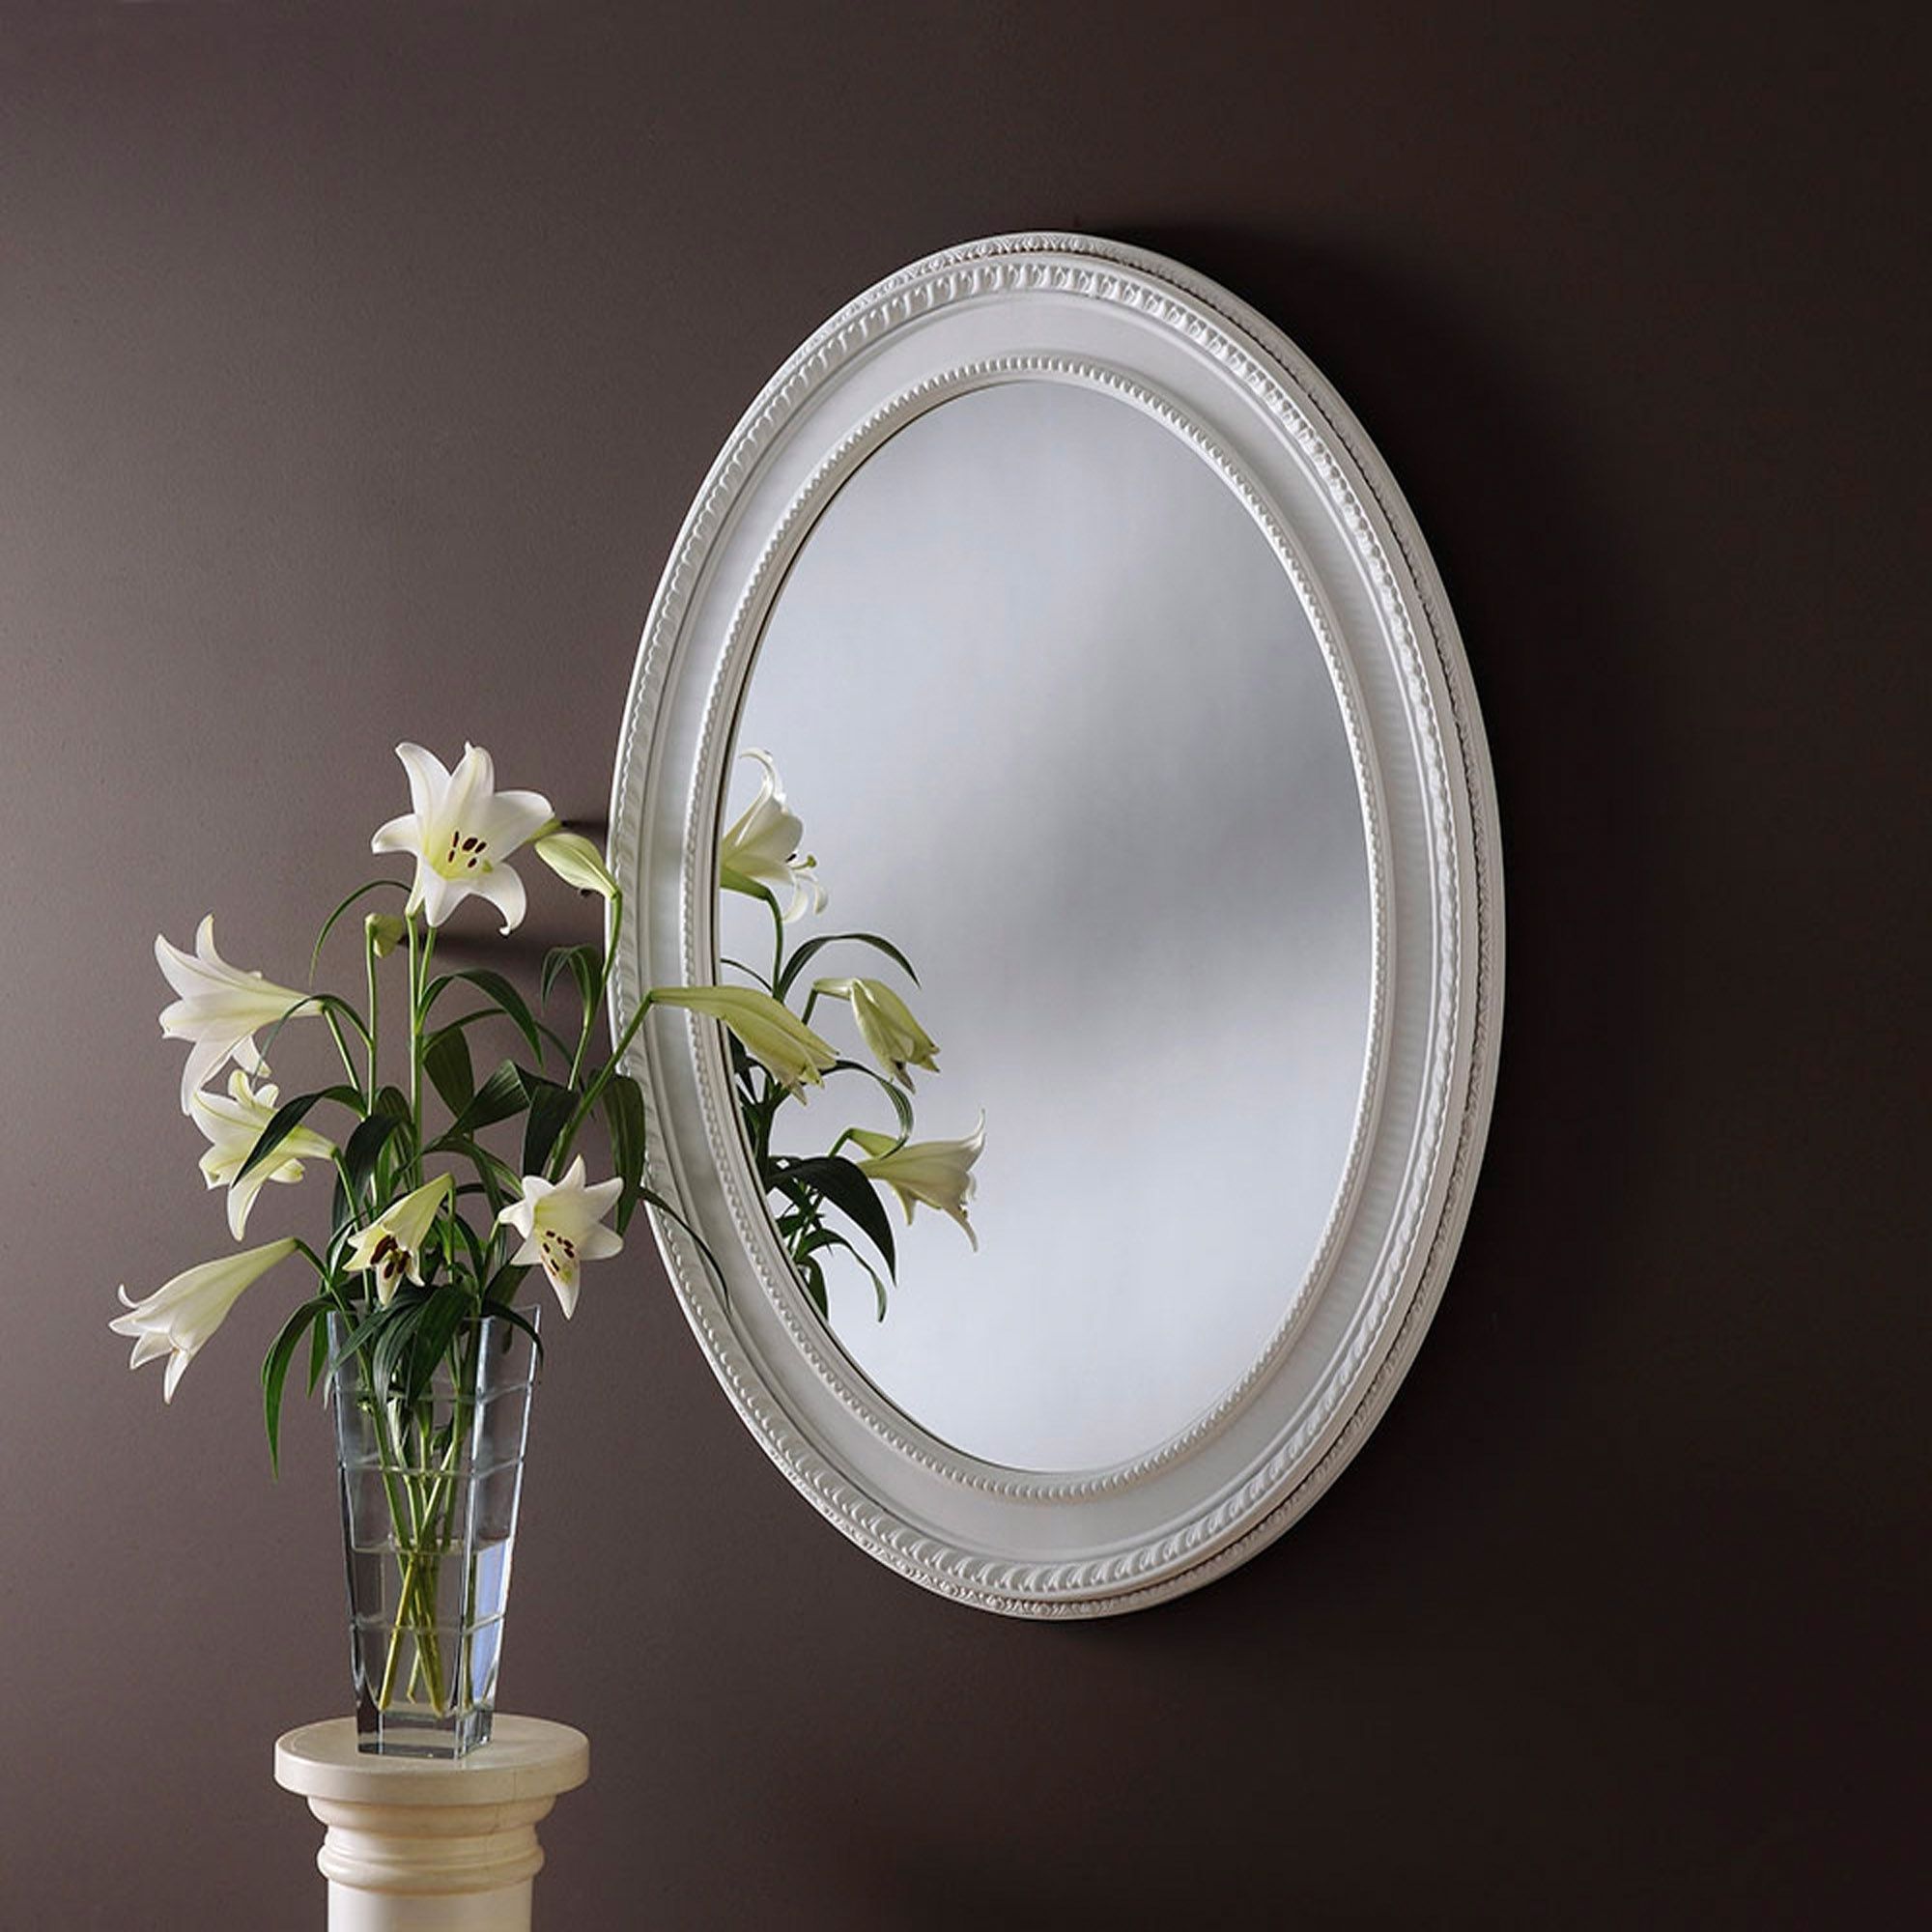 Most Popular Modern Oversized Wall Mirrors Intended For Large Oval Contemporary Mirror (View 6 of 15)